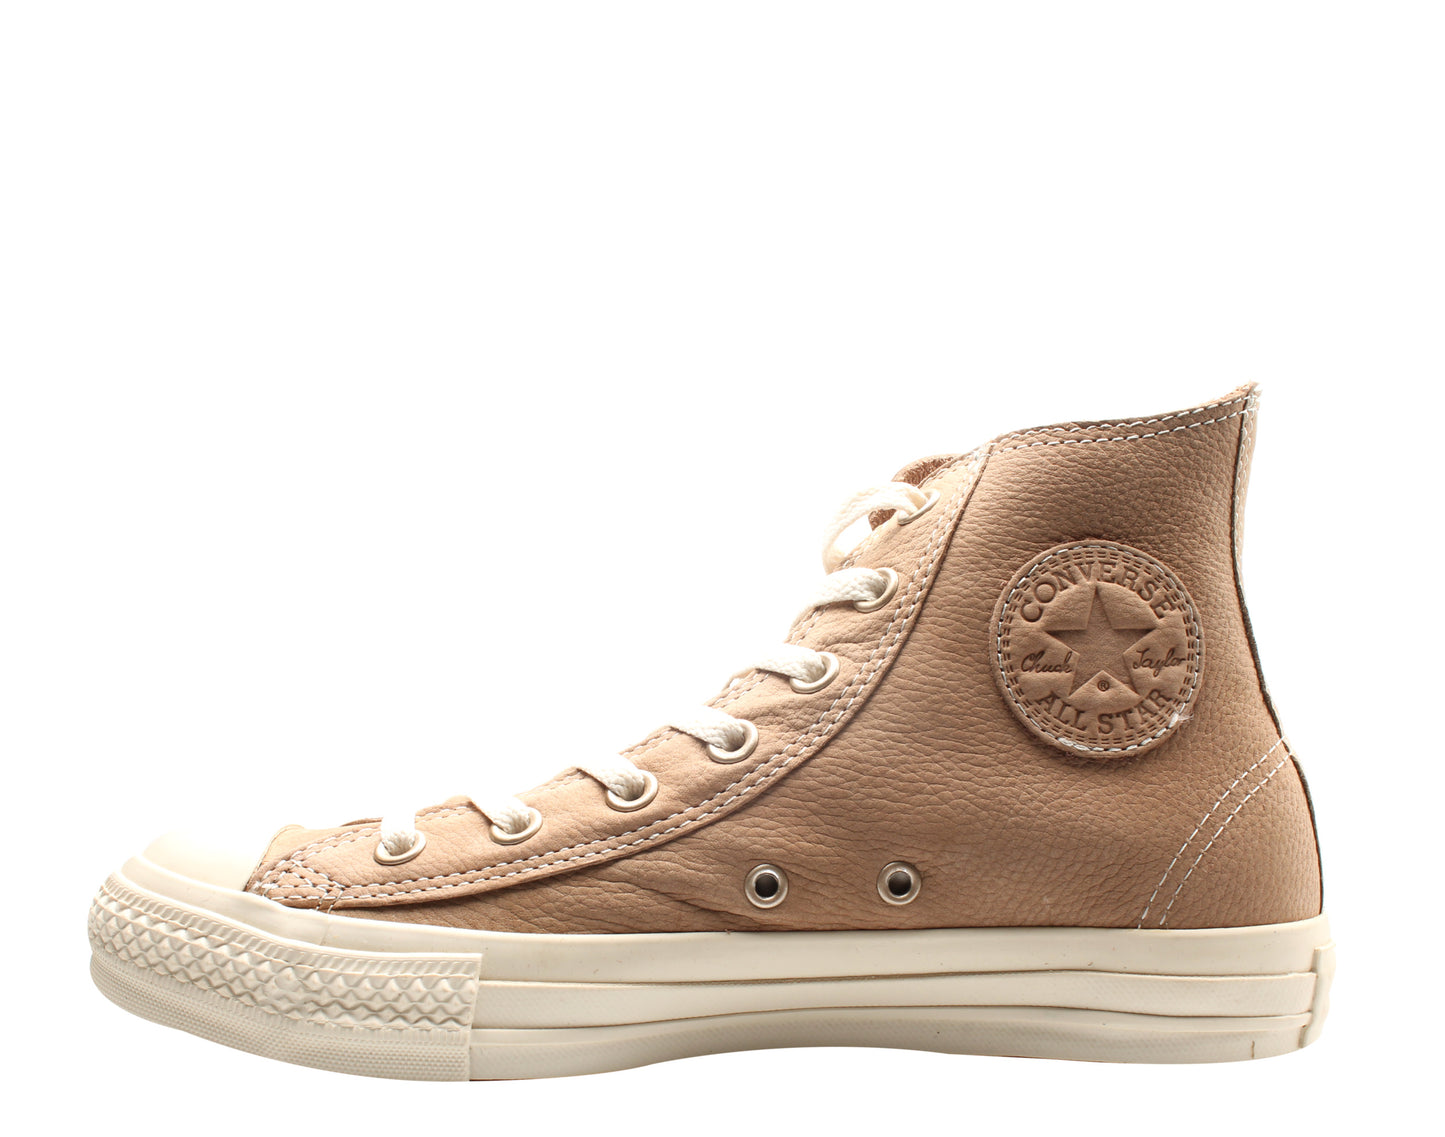 Converse Chuck Taylor All Star Special Leather Cork/Parchment High Top Sneakers 1U394